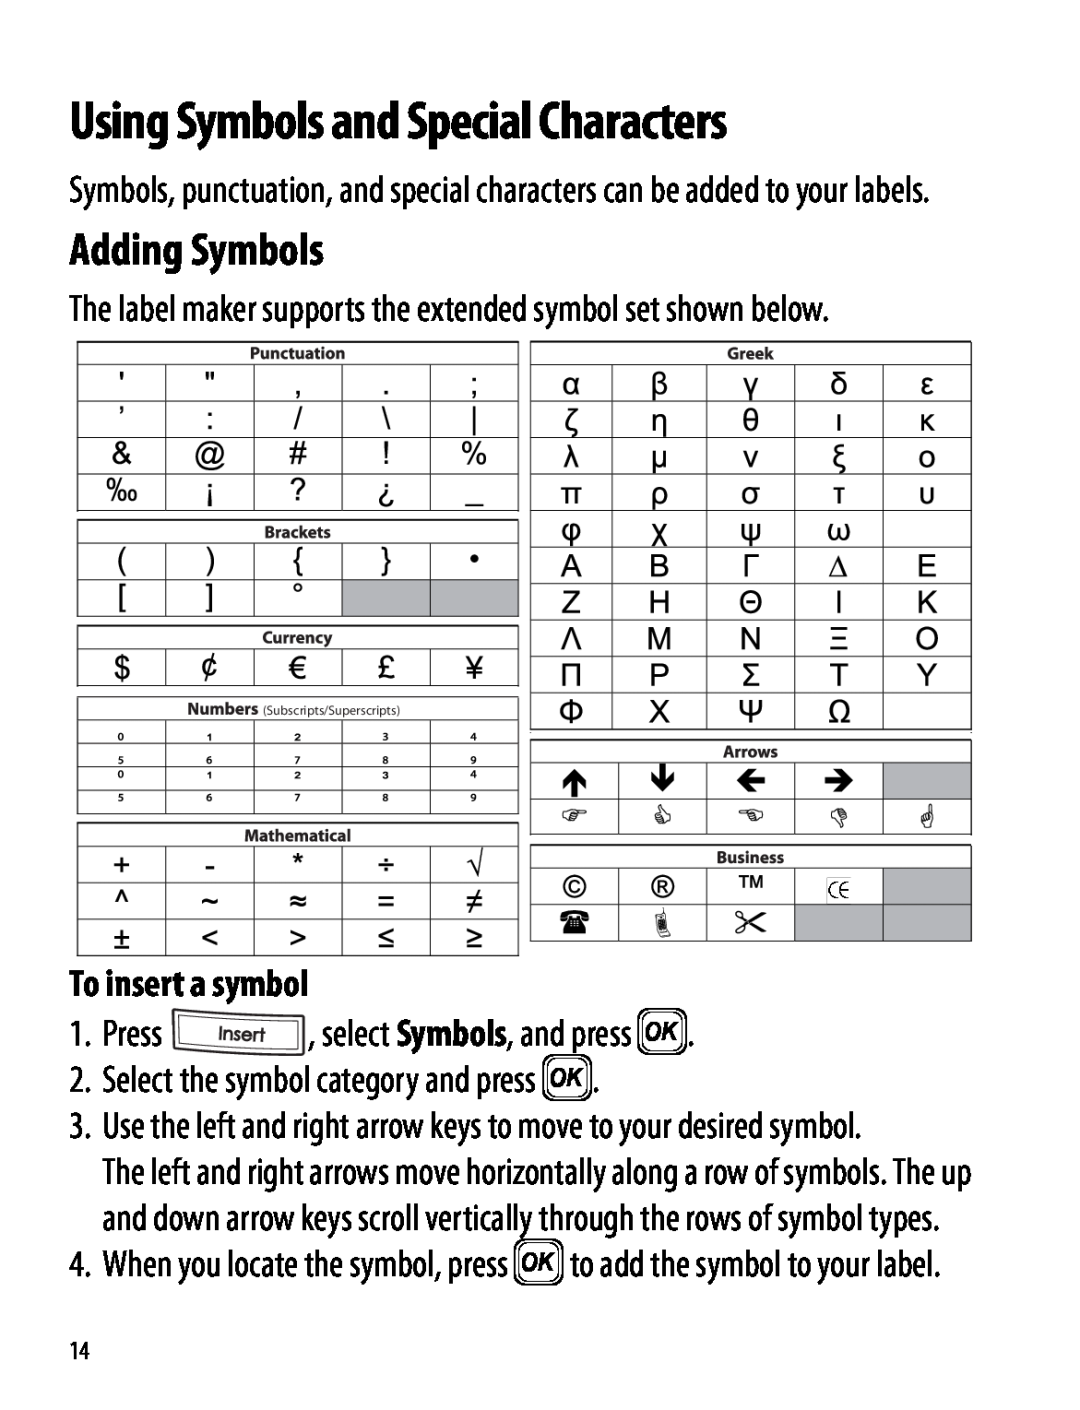 Dymo 220P manual Adding Symbols, To insert a symbol, Using Symbols and Special Characters, Subscripts/Superscripts 